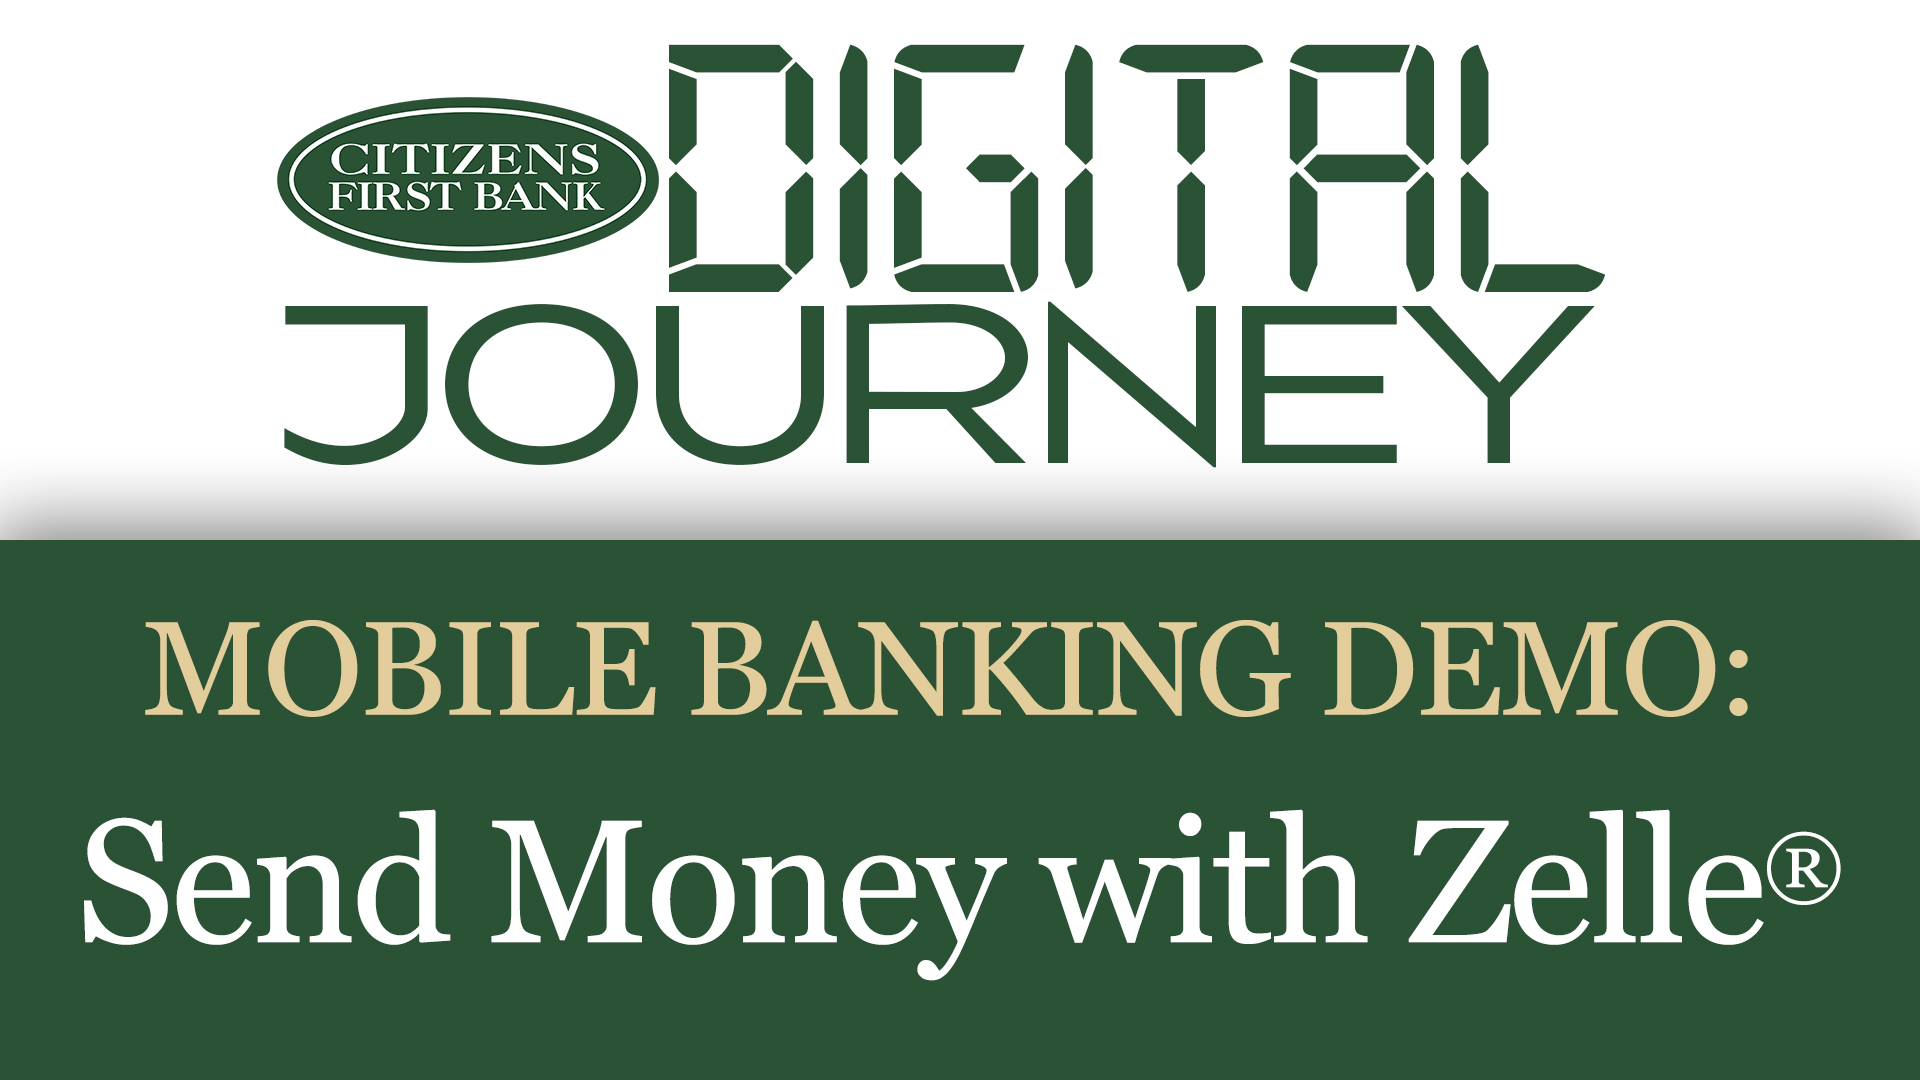 Digital Journey logo with our mobile banking demo: Send Money with Zelle®